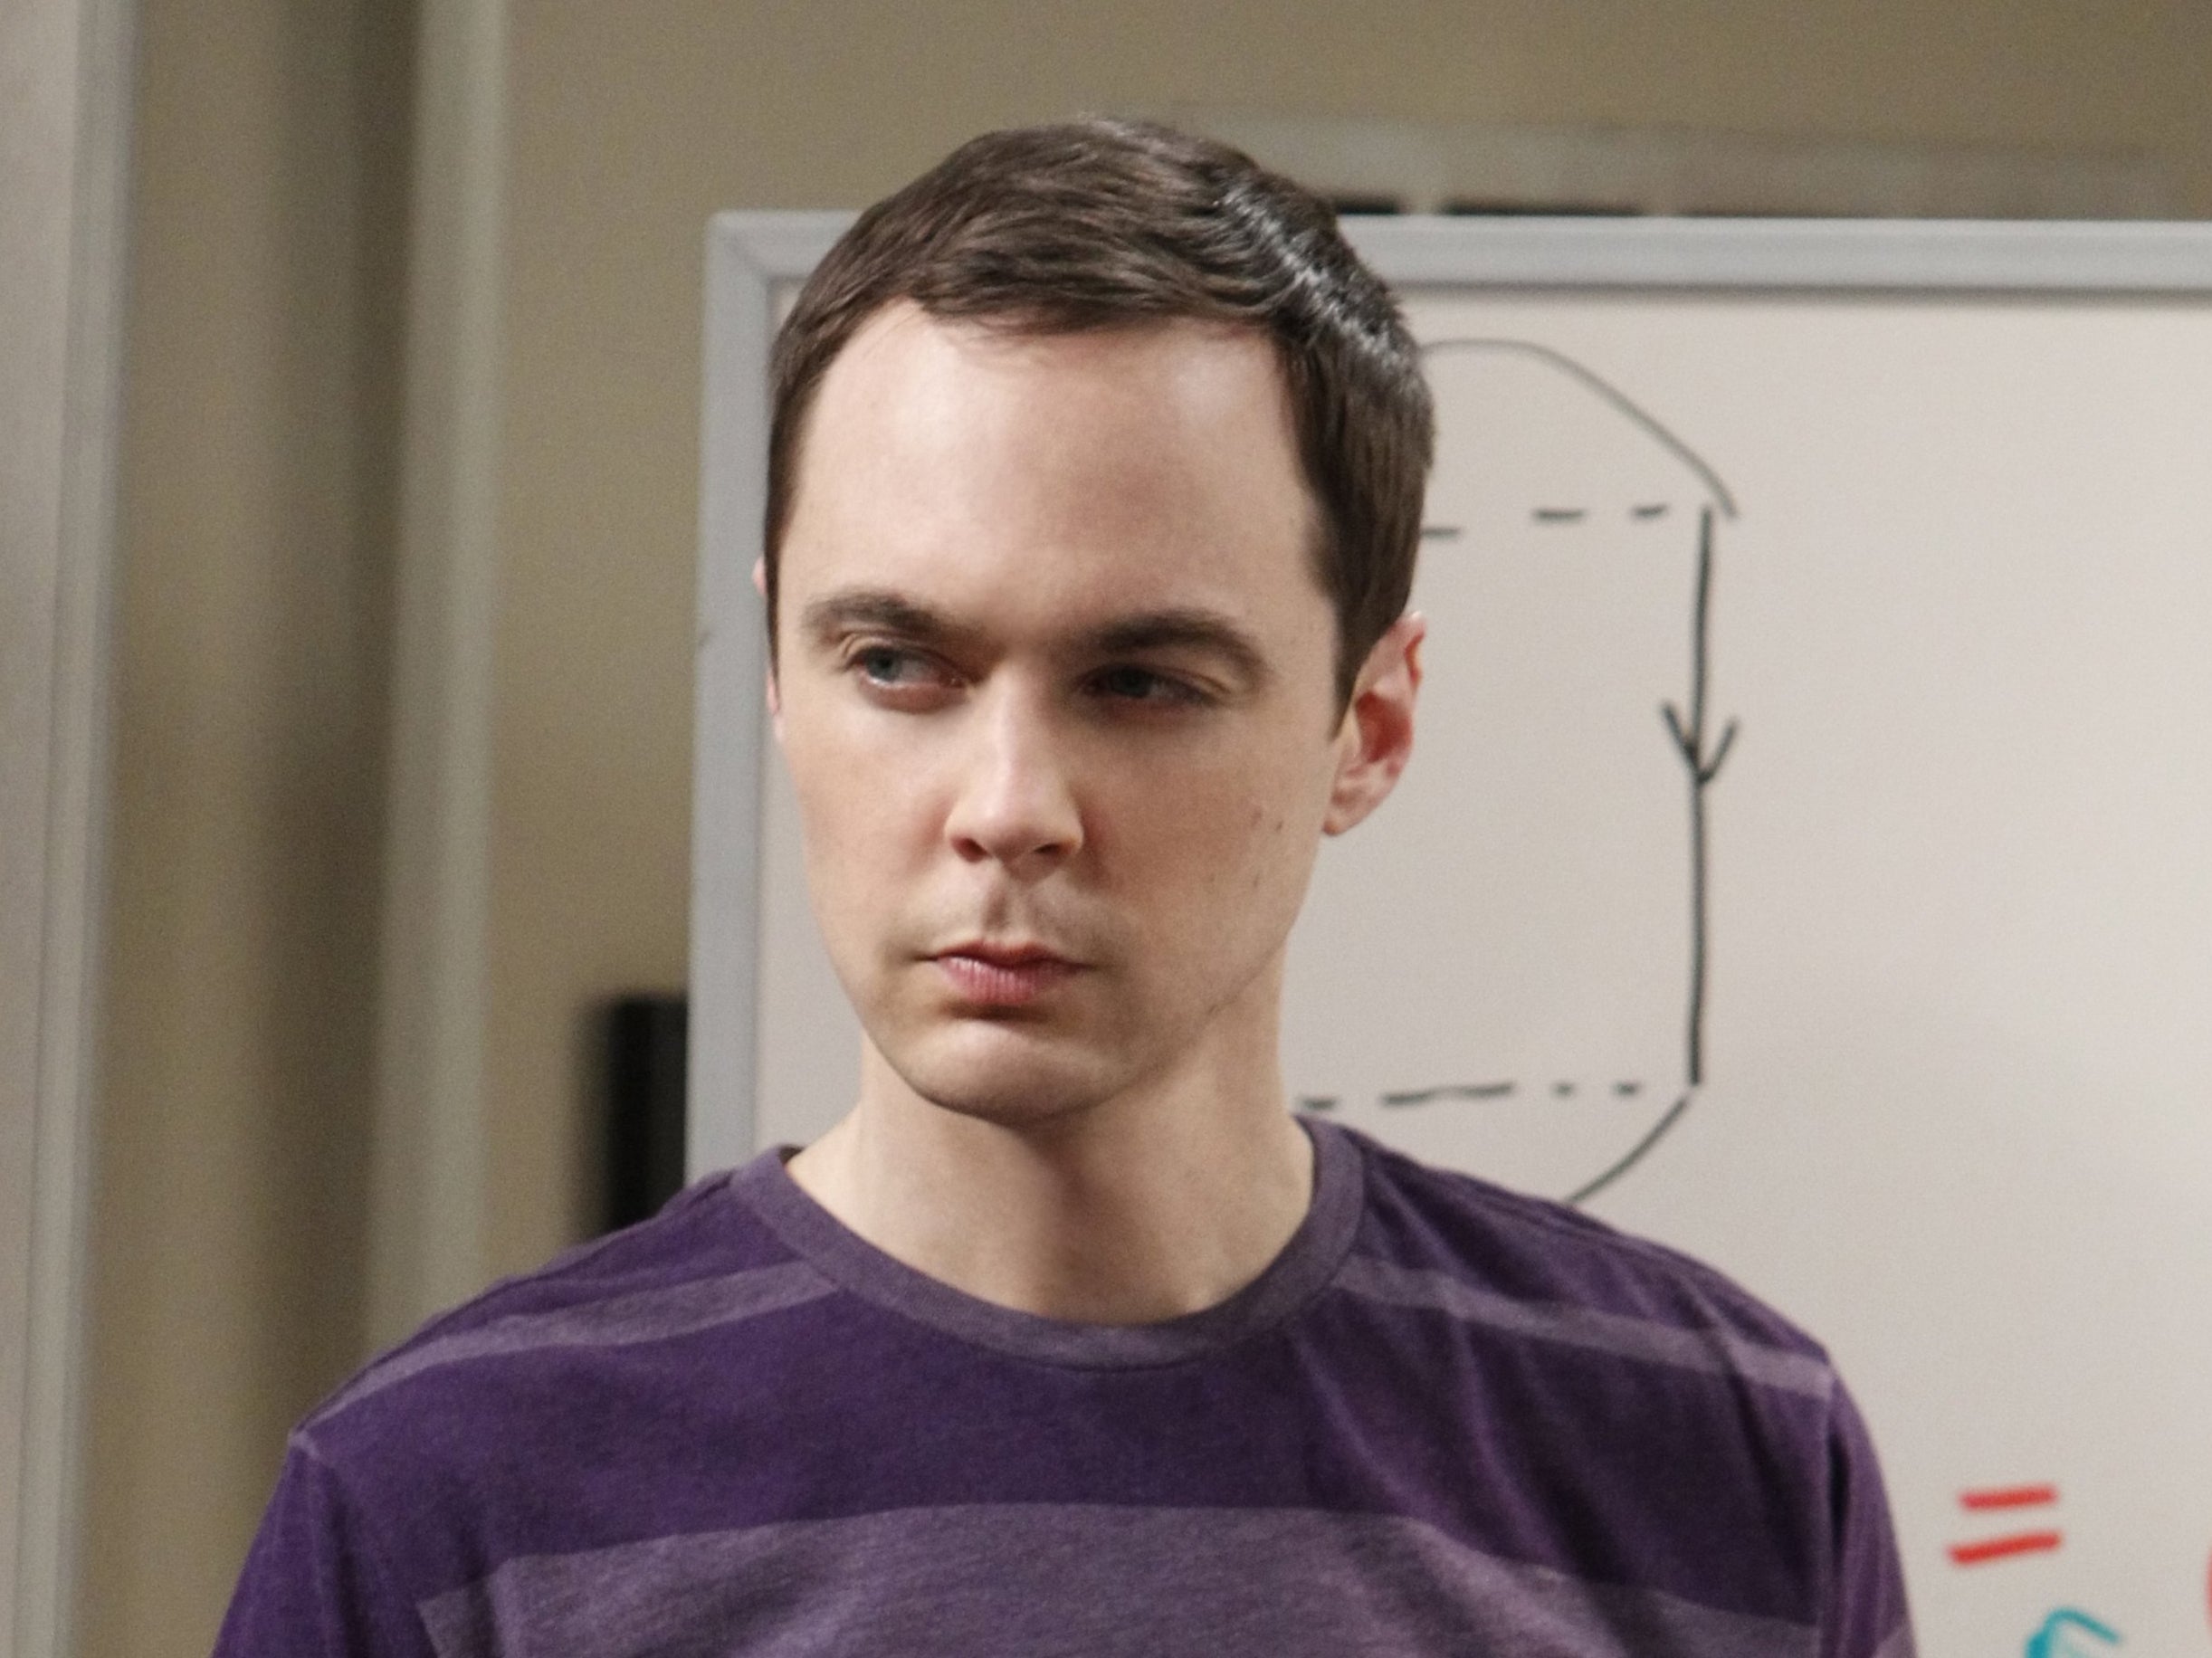 Young Sheldon fixes Big Bang Theory plot hole in latest episode